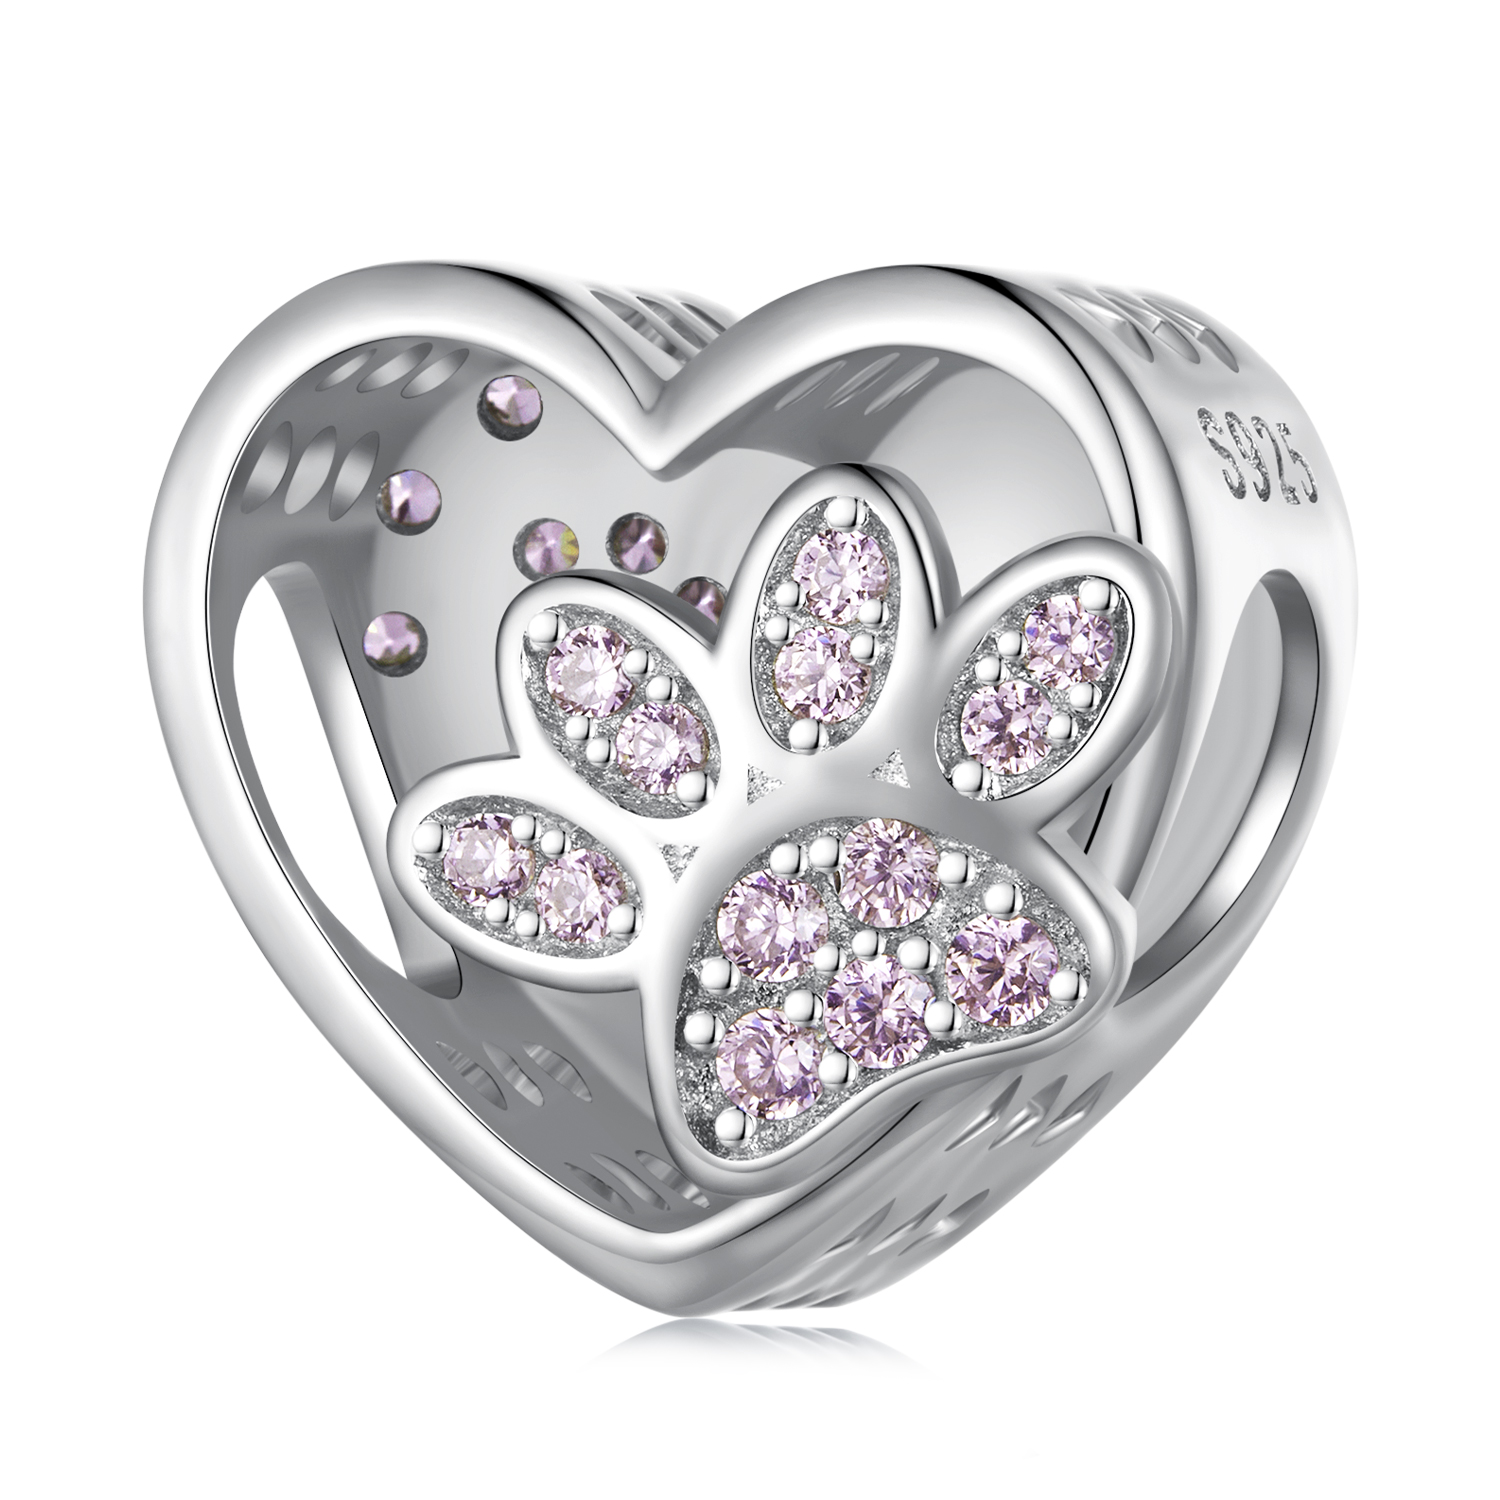 pandora style cute pet paw prints can be engraved charm scc1191 a